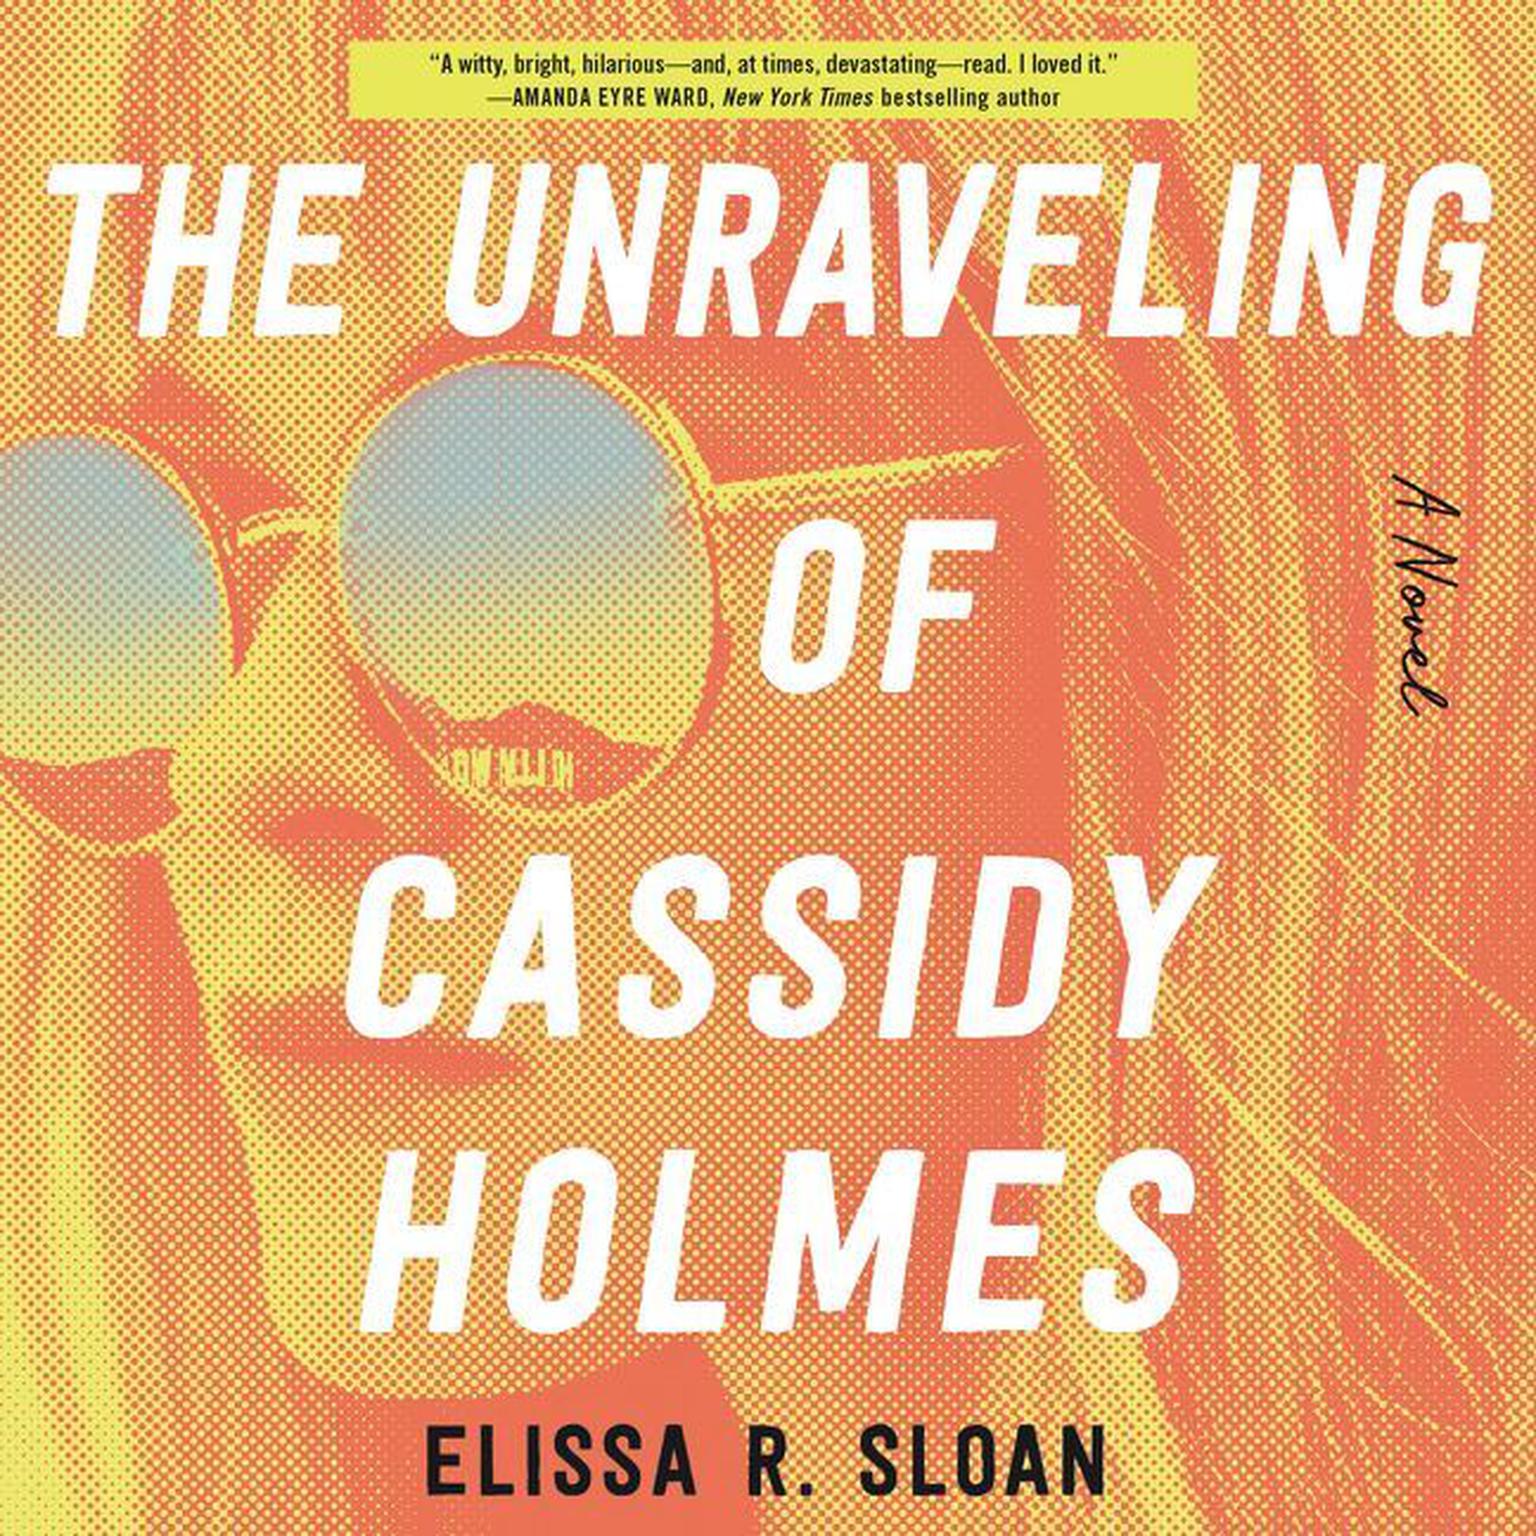 The Unraveling of Cassidy Holmes: A Novel Audiobook, by Elissa R. Sloan